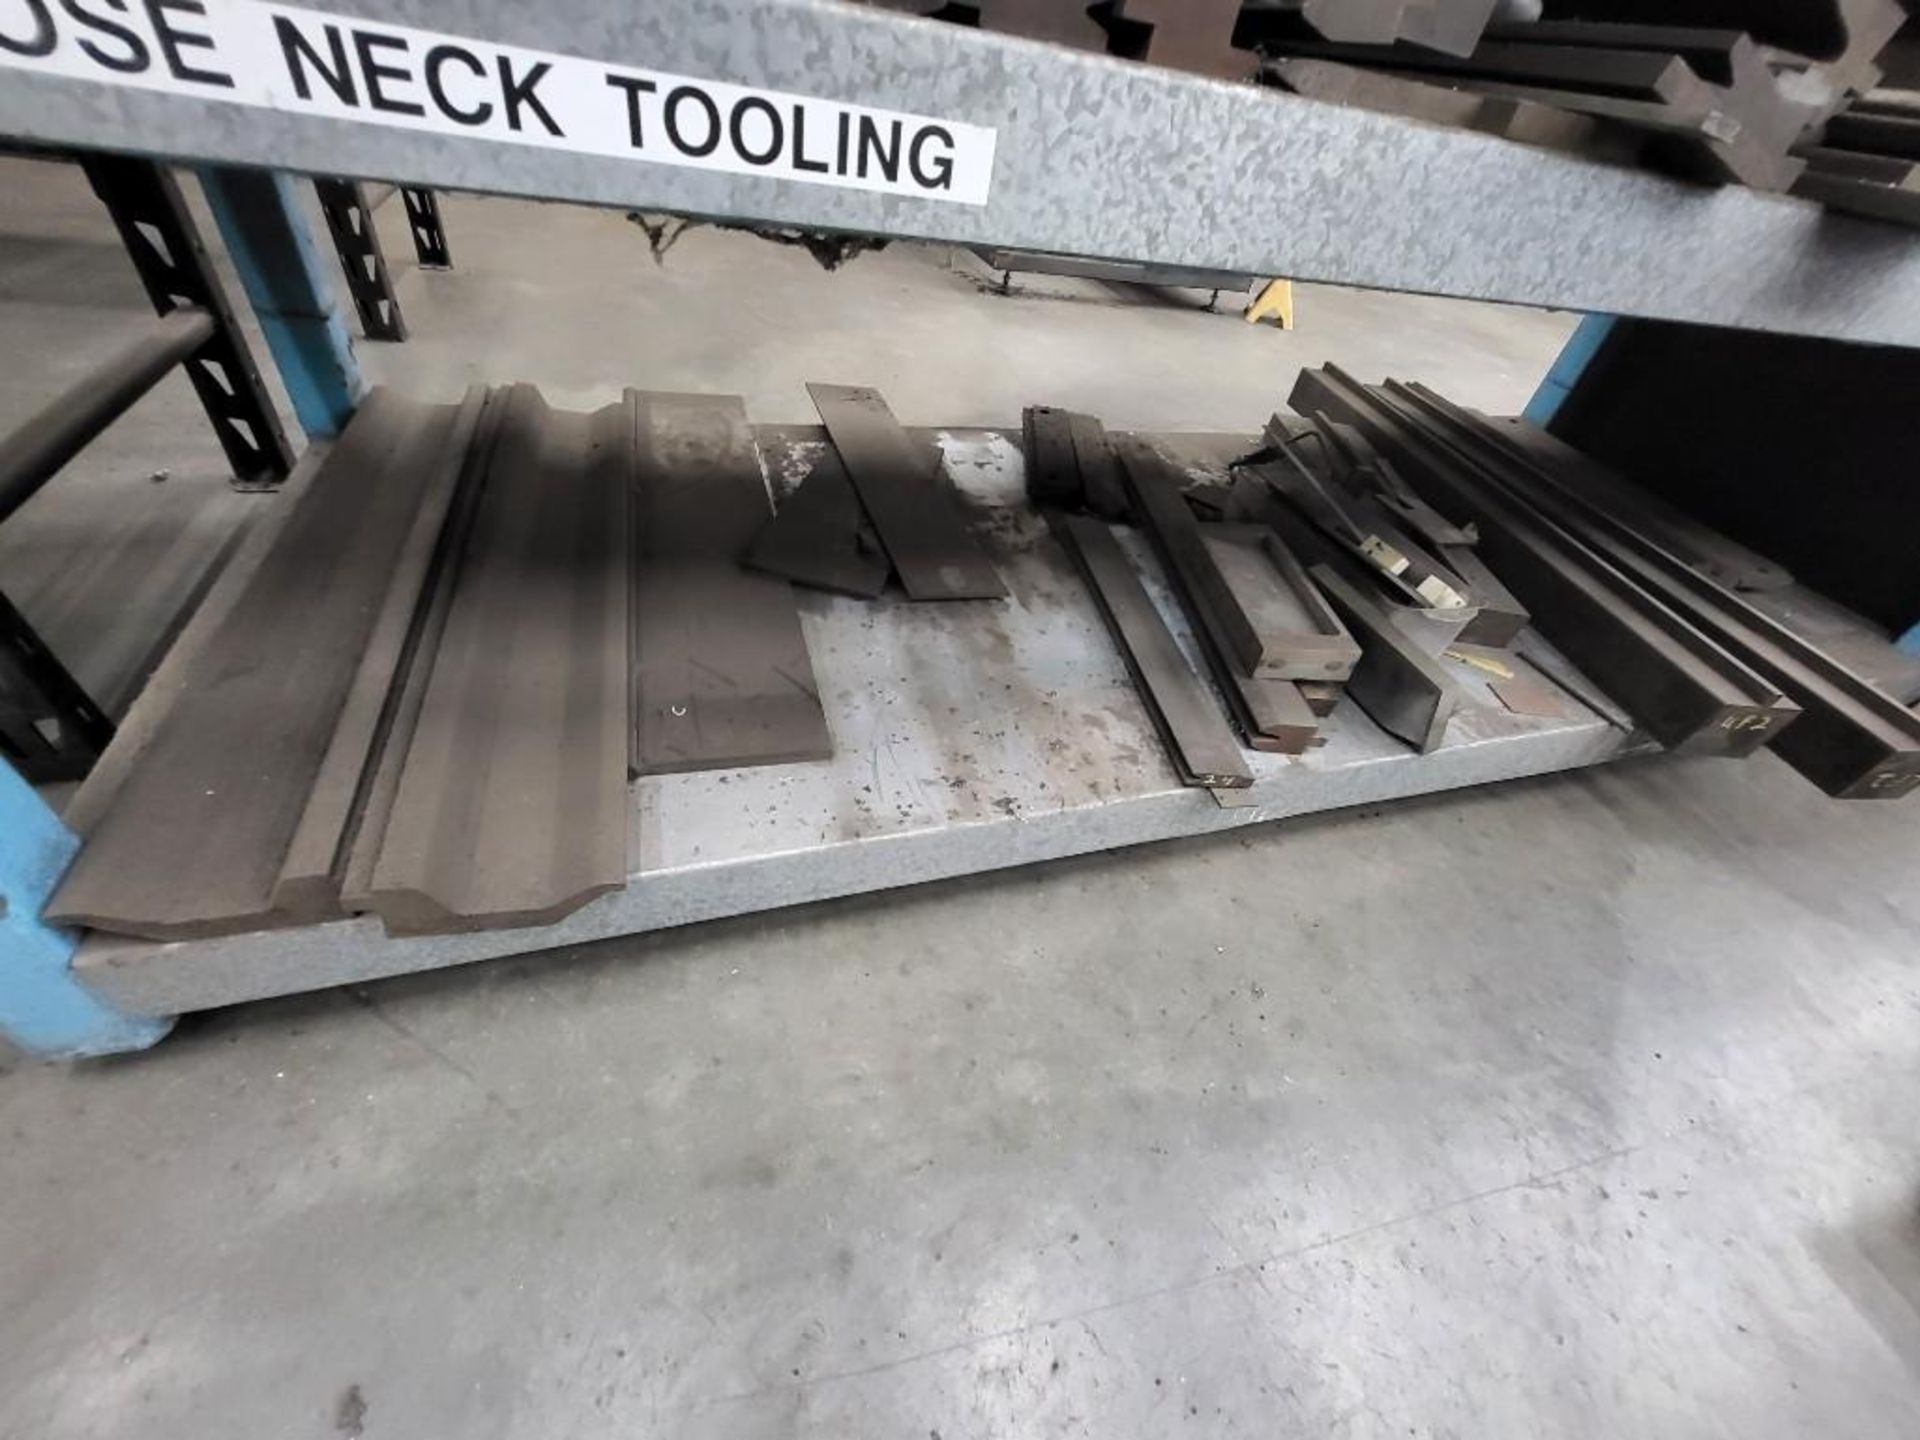 LOT OF PRESS BRAKE TOOLING WITH SHELF - Image 10 of 18